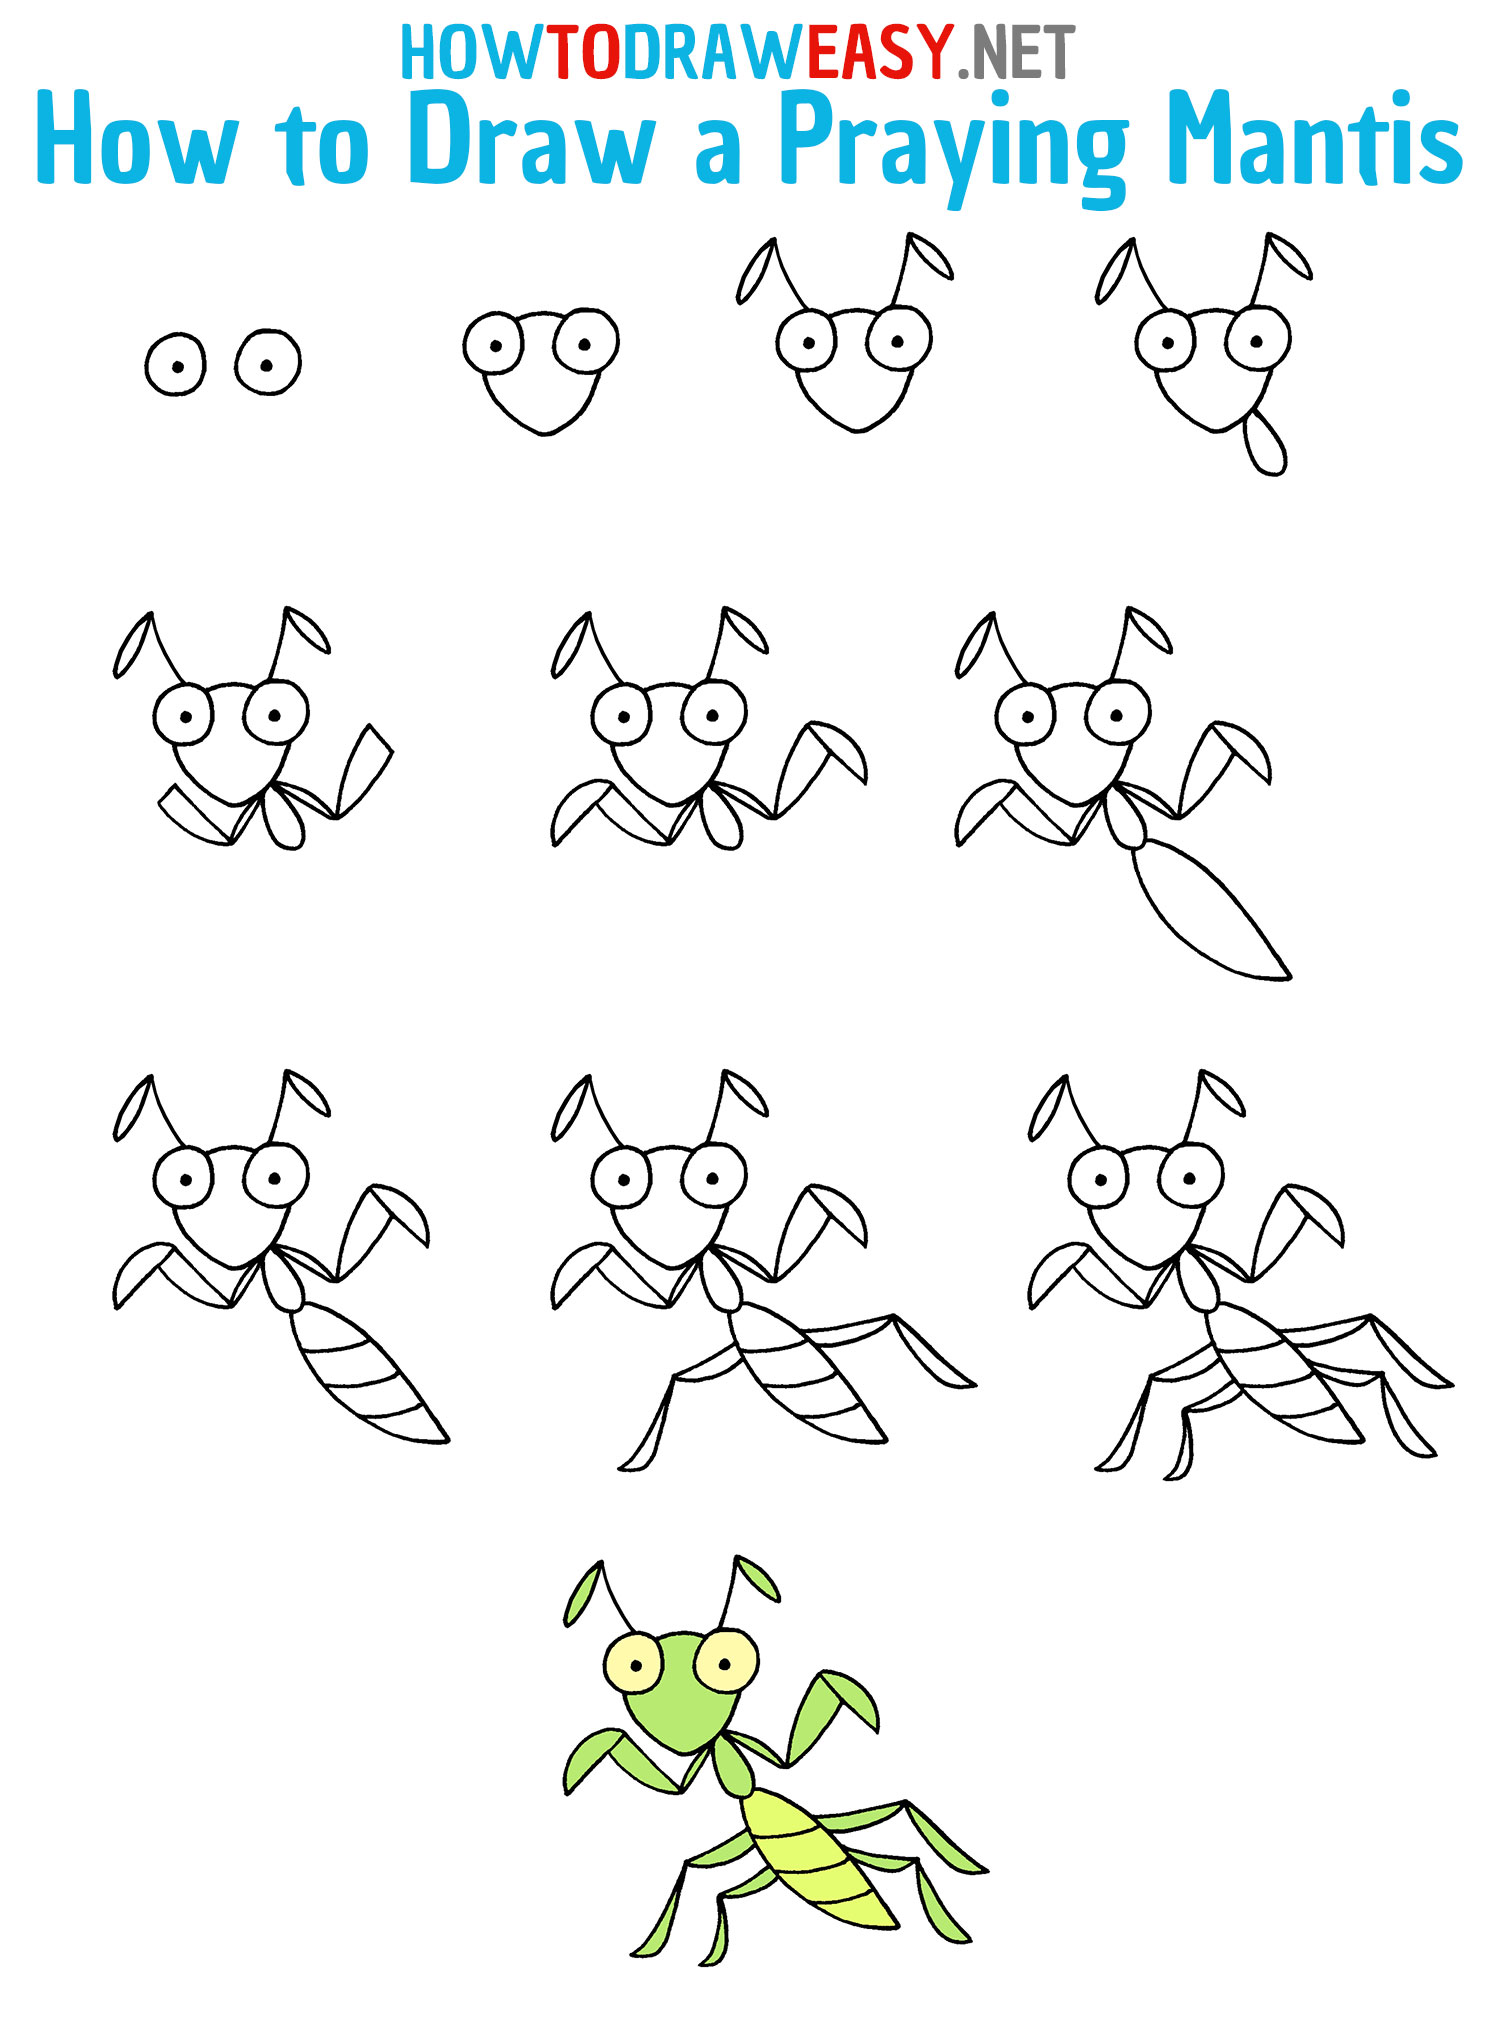 How to Draw a Praying Mantis Step by Step